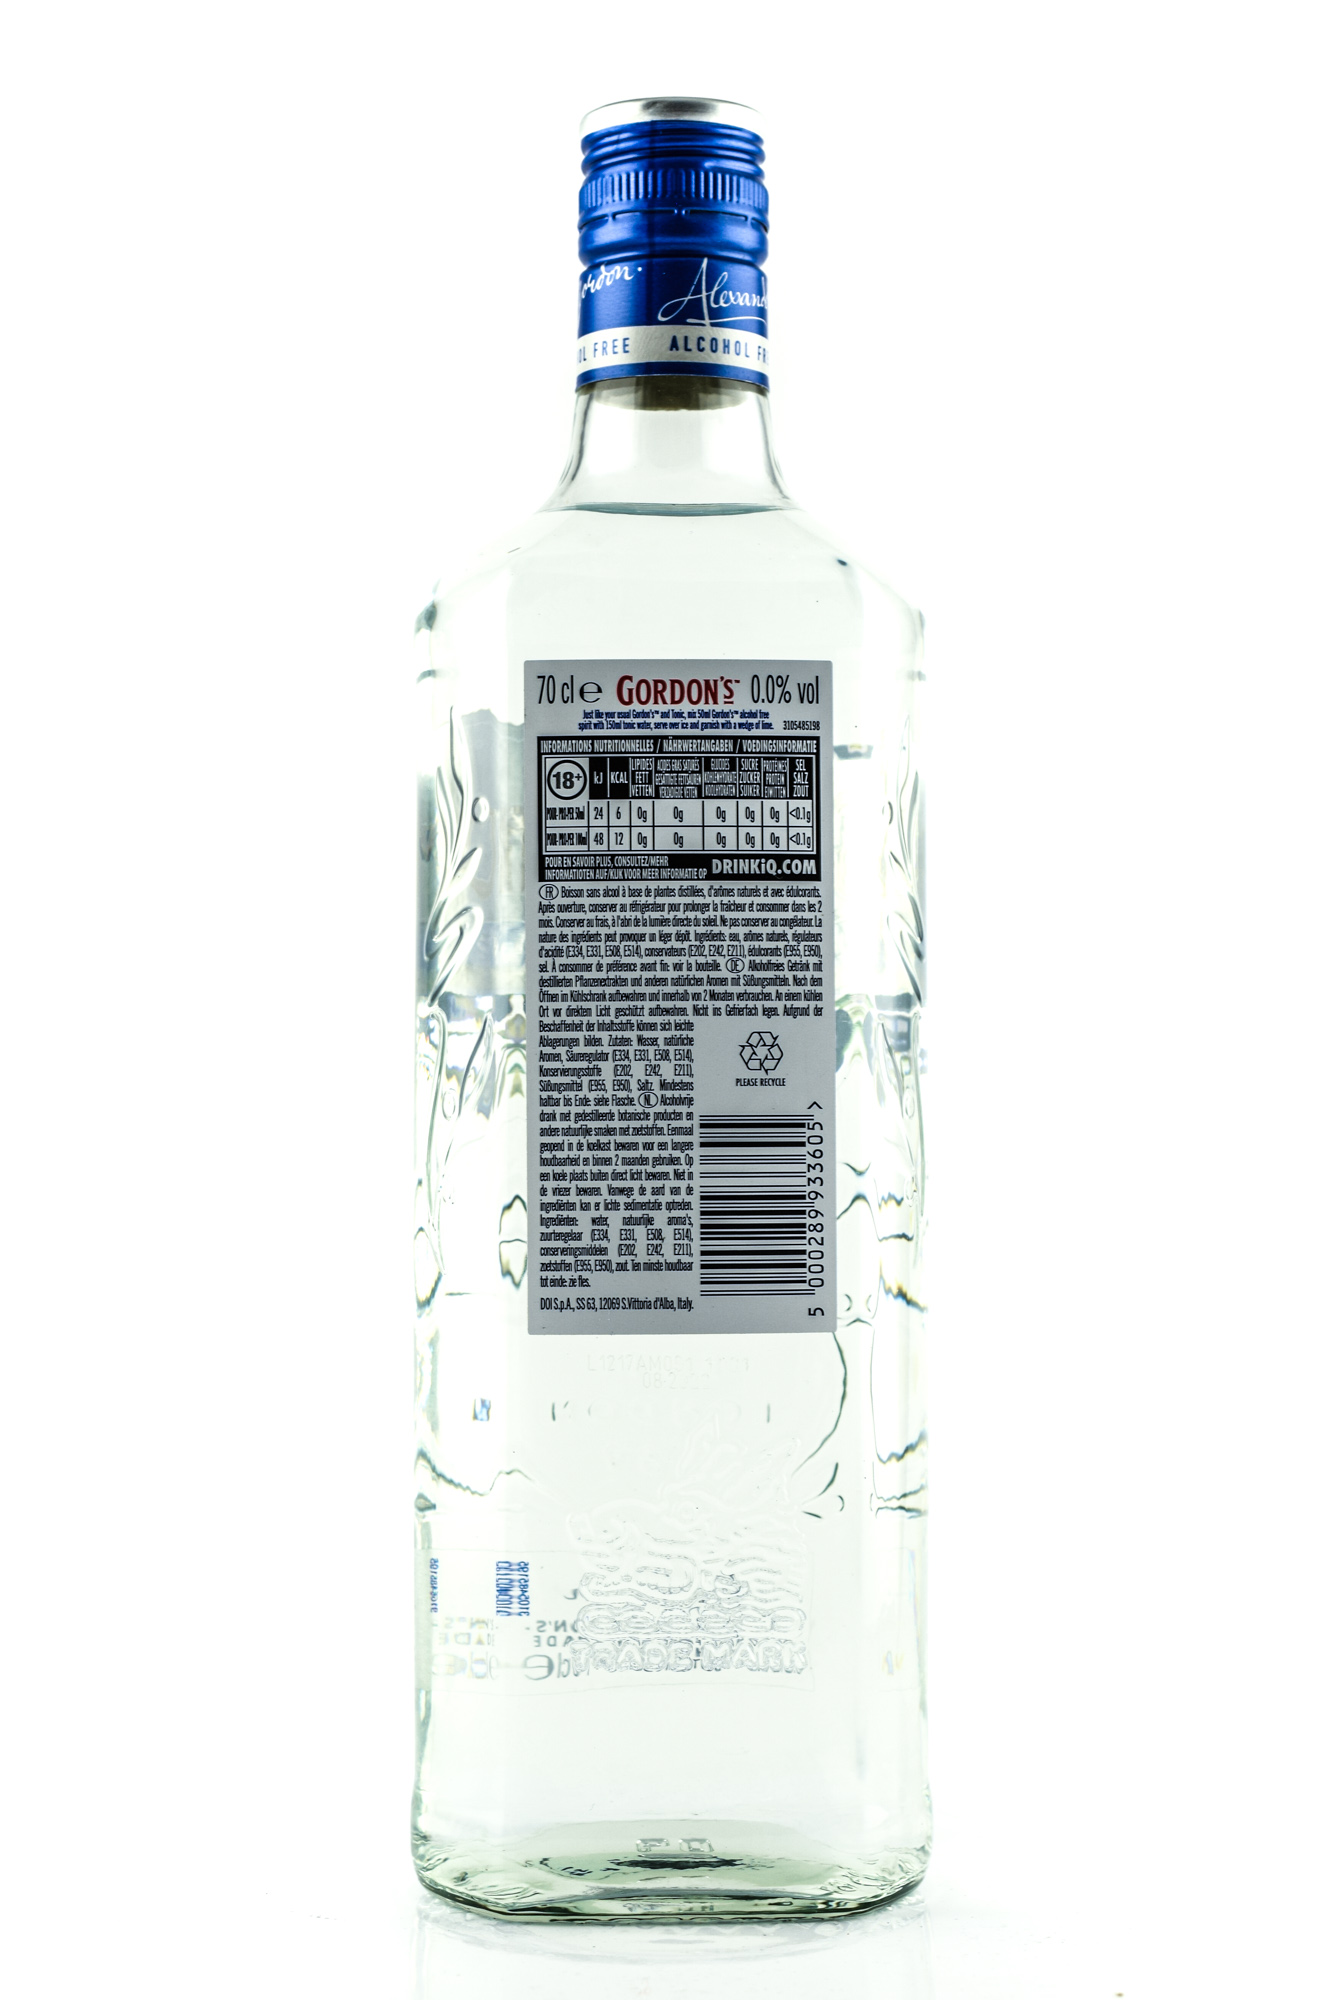 explore at of Home Free >> Malts | Alcohol Malts 0,0%vol. now! Home Gordon\'s of